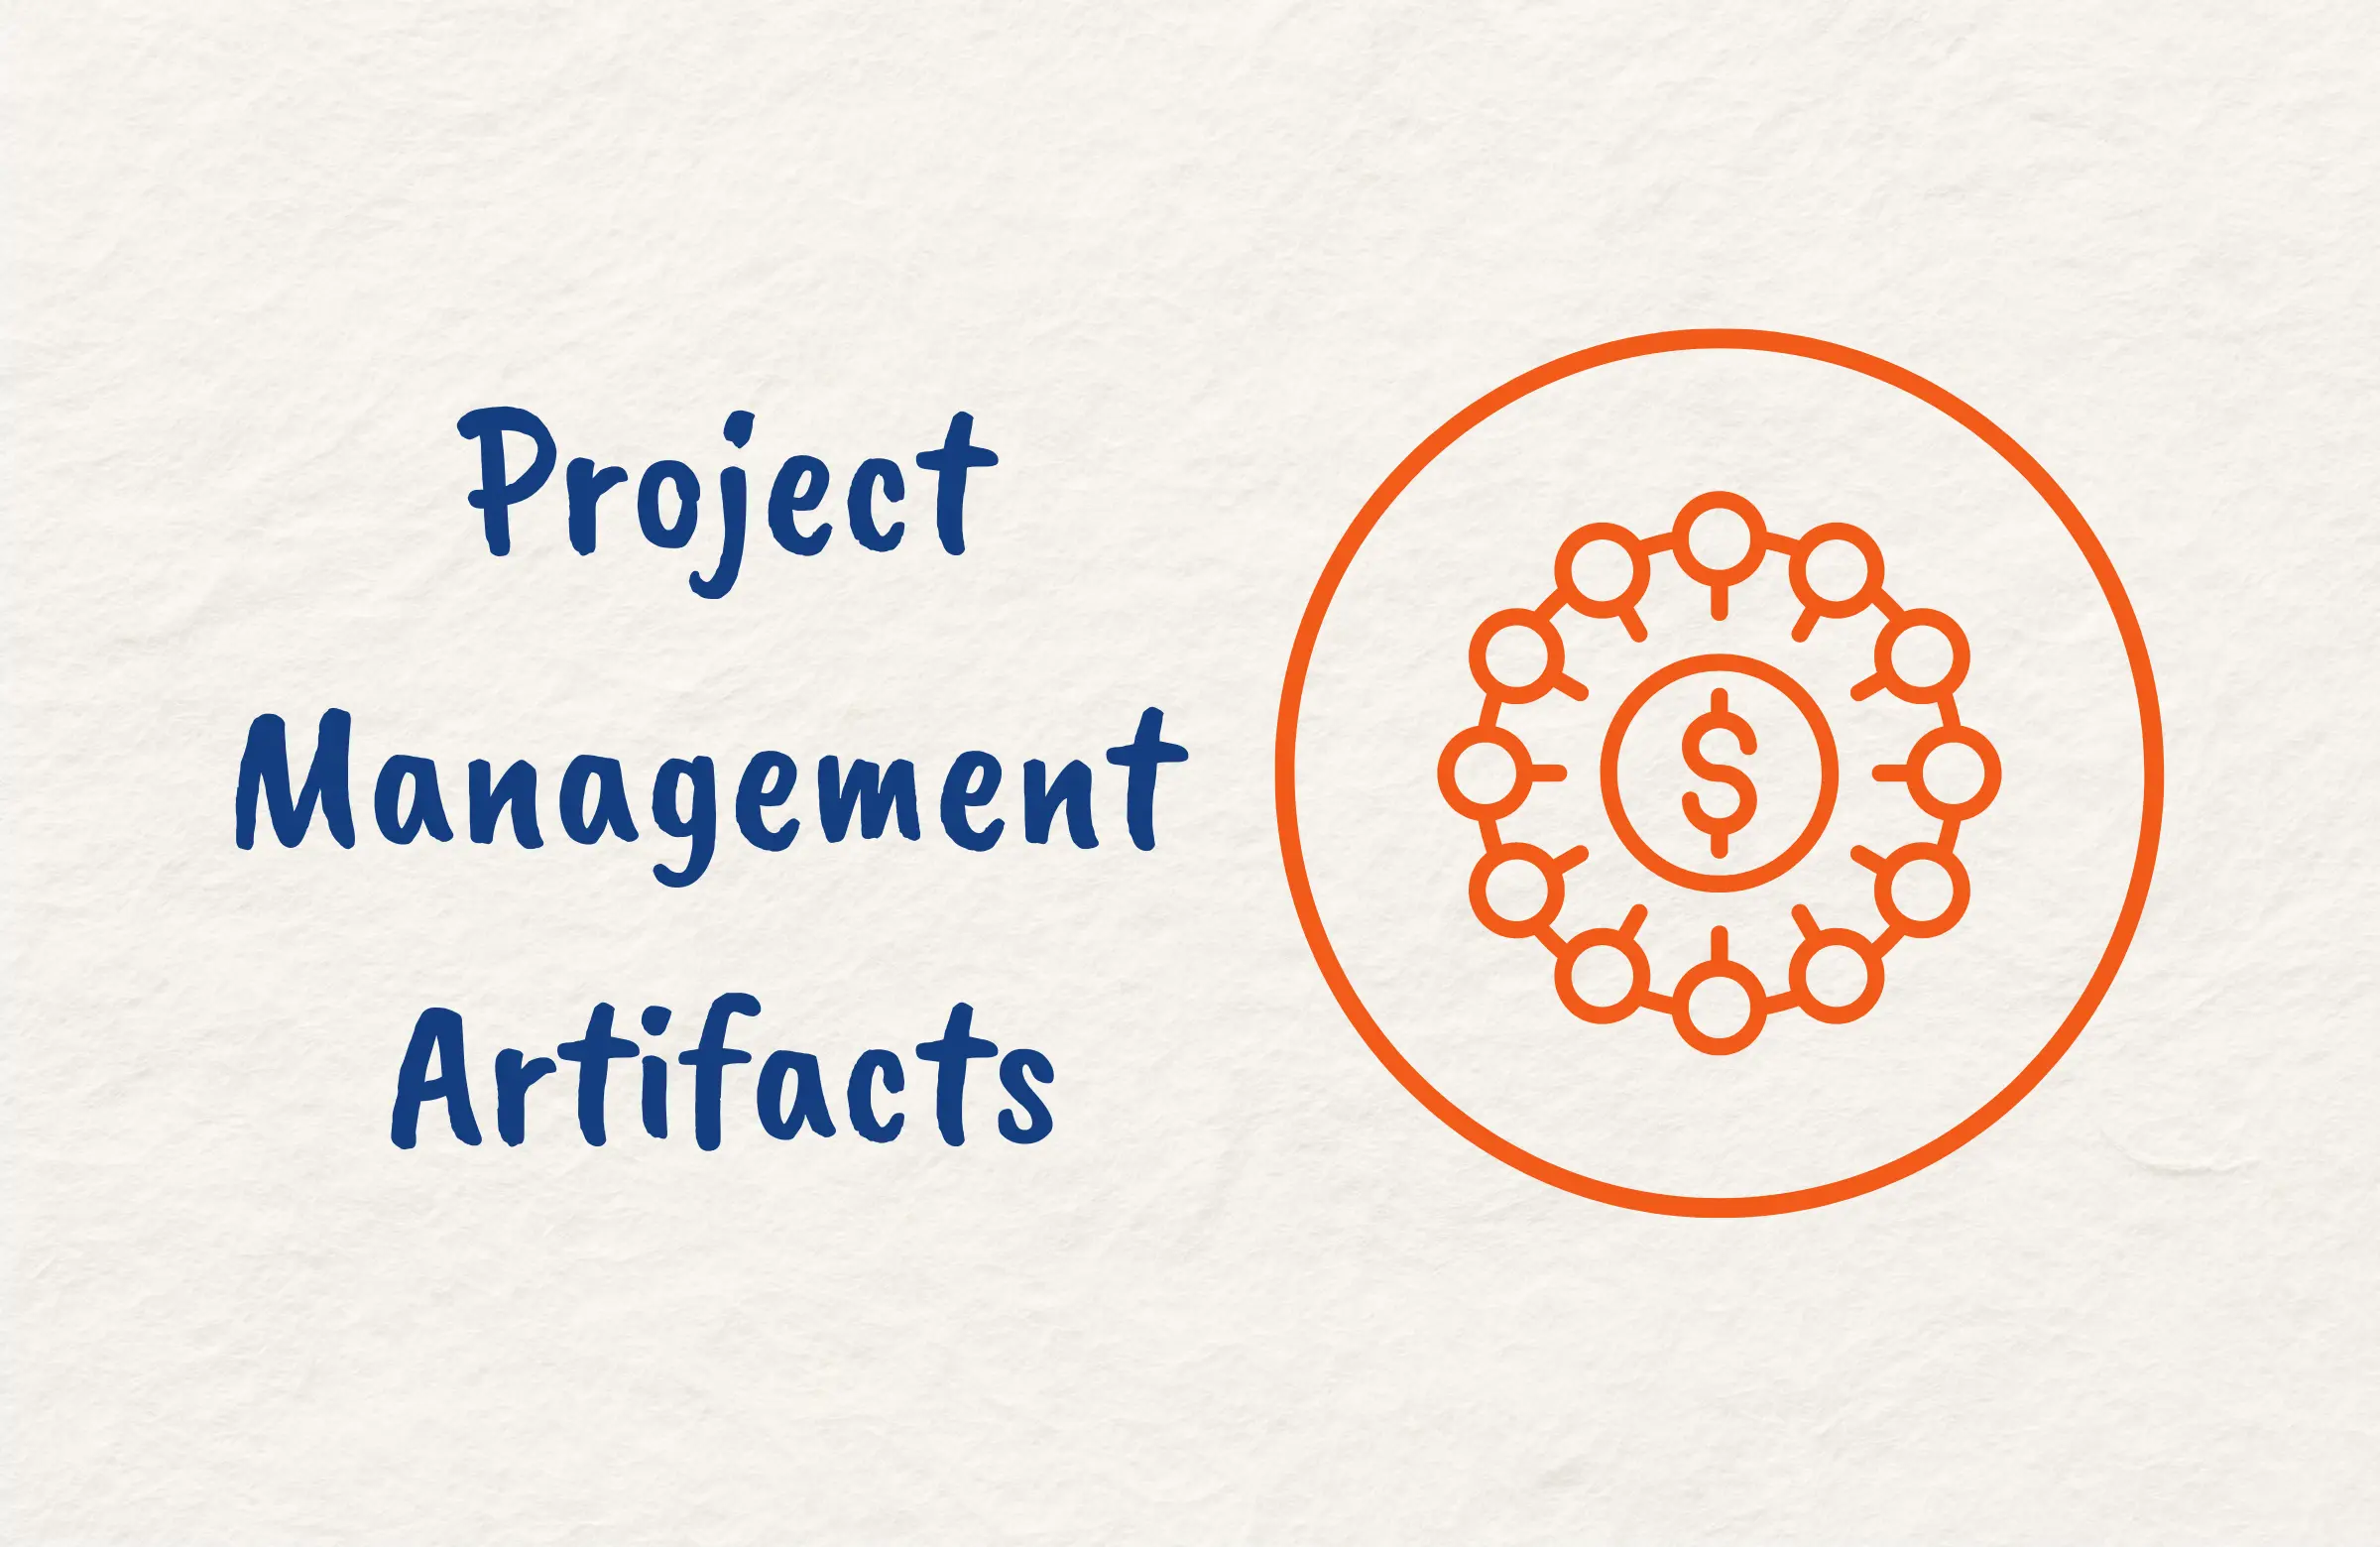 What are Project Artifacts in Project Management